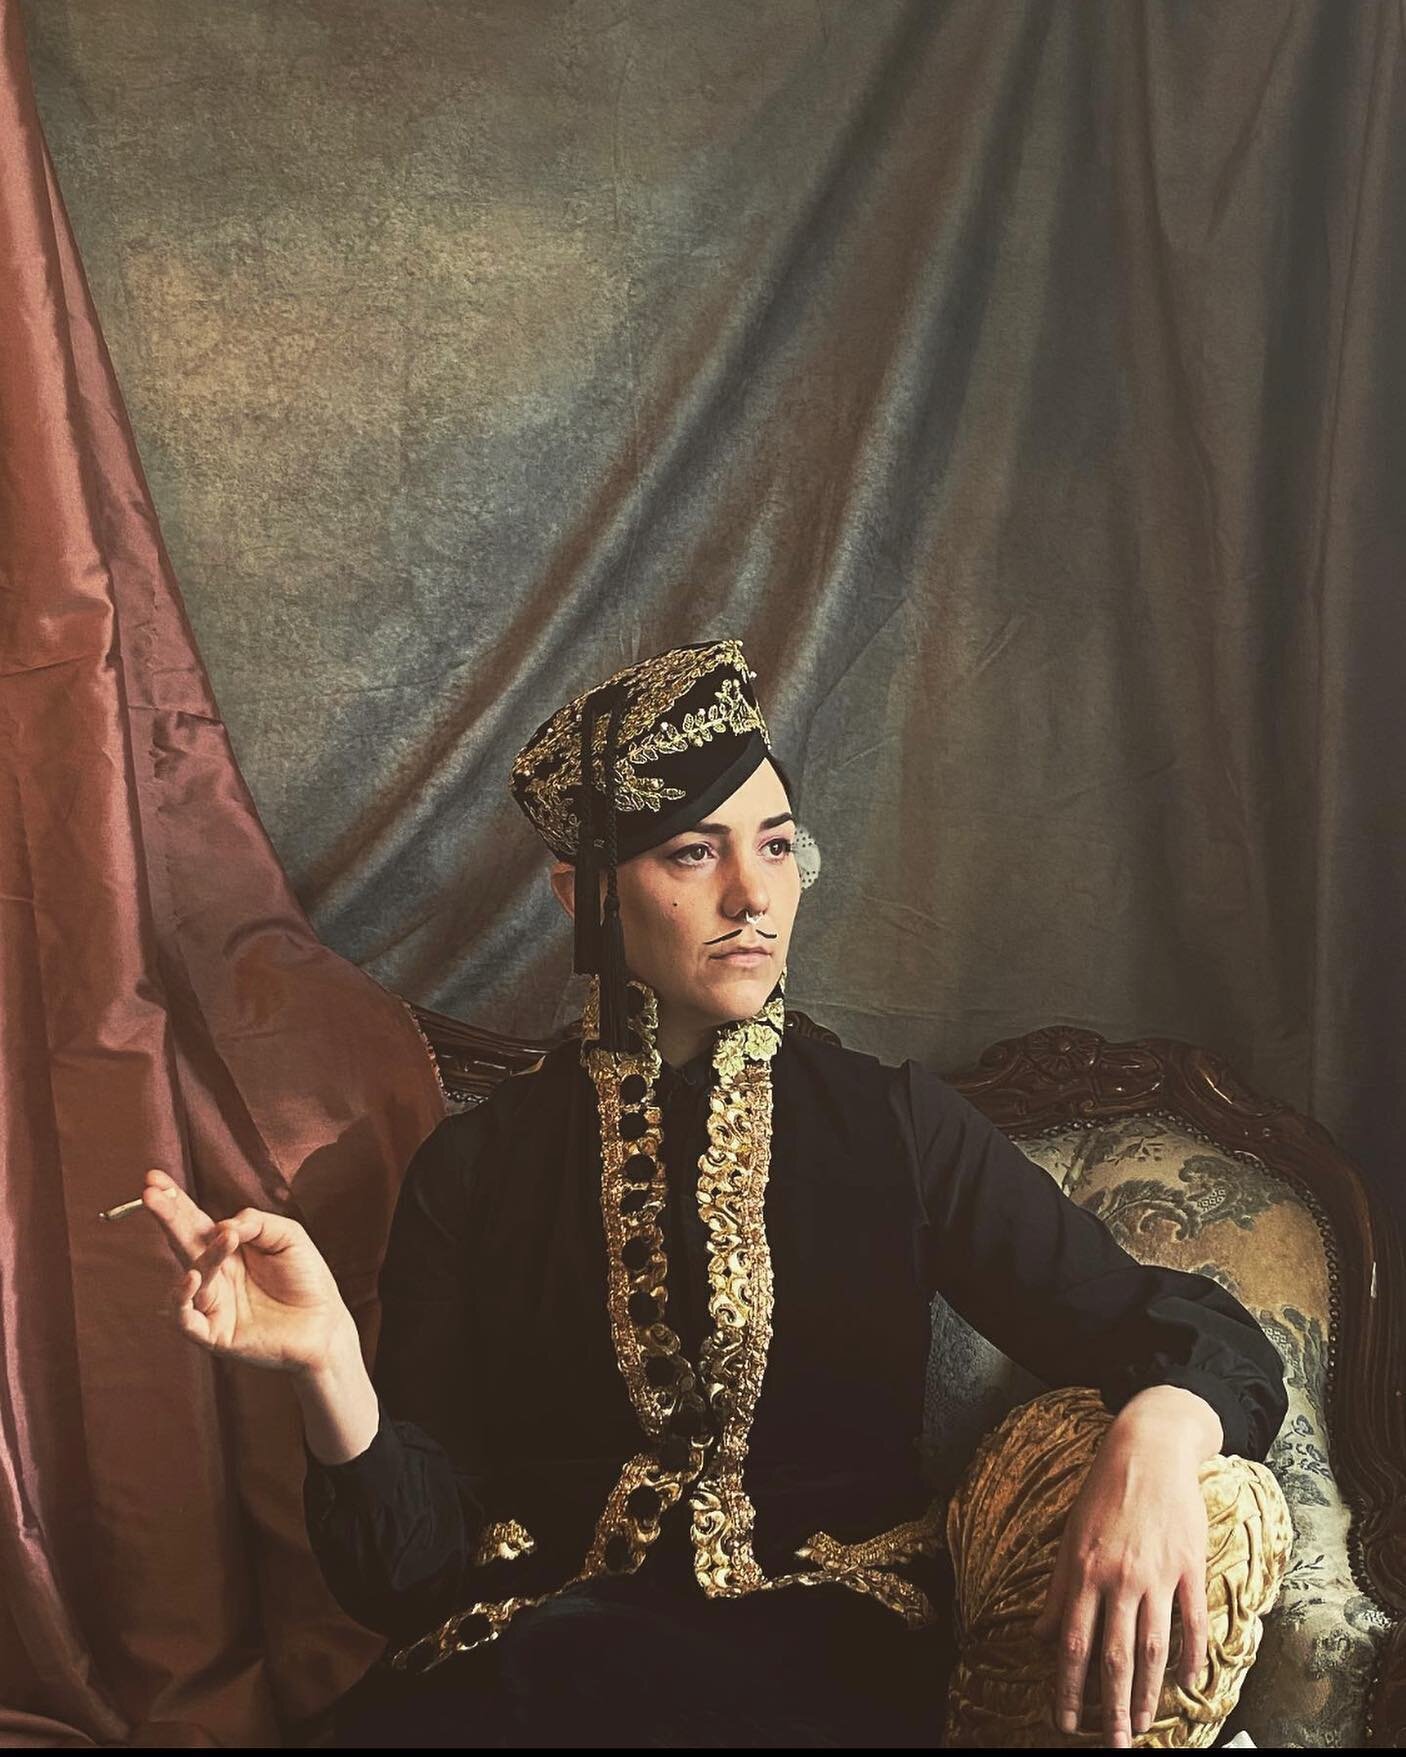 Repost @drucillaburrell 
Waistcoat and smoking hat made to order by @magdaleneceleste. Drop her a dm if you fancy something deliciously decant for your winter lockdown lounging Photo @atelierococo